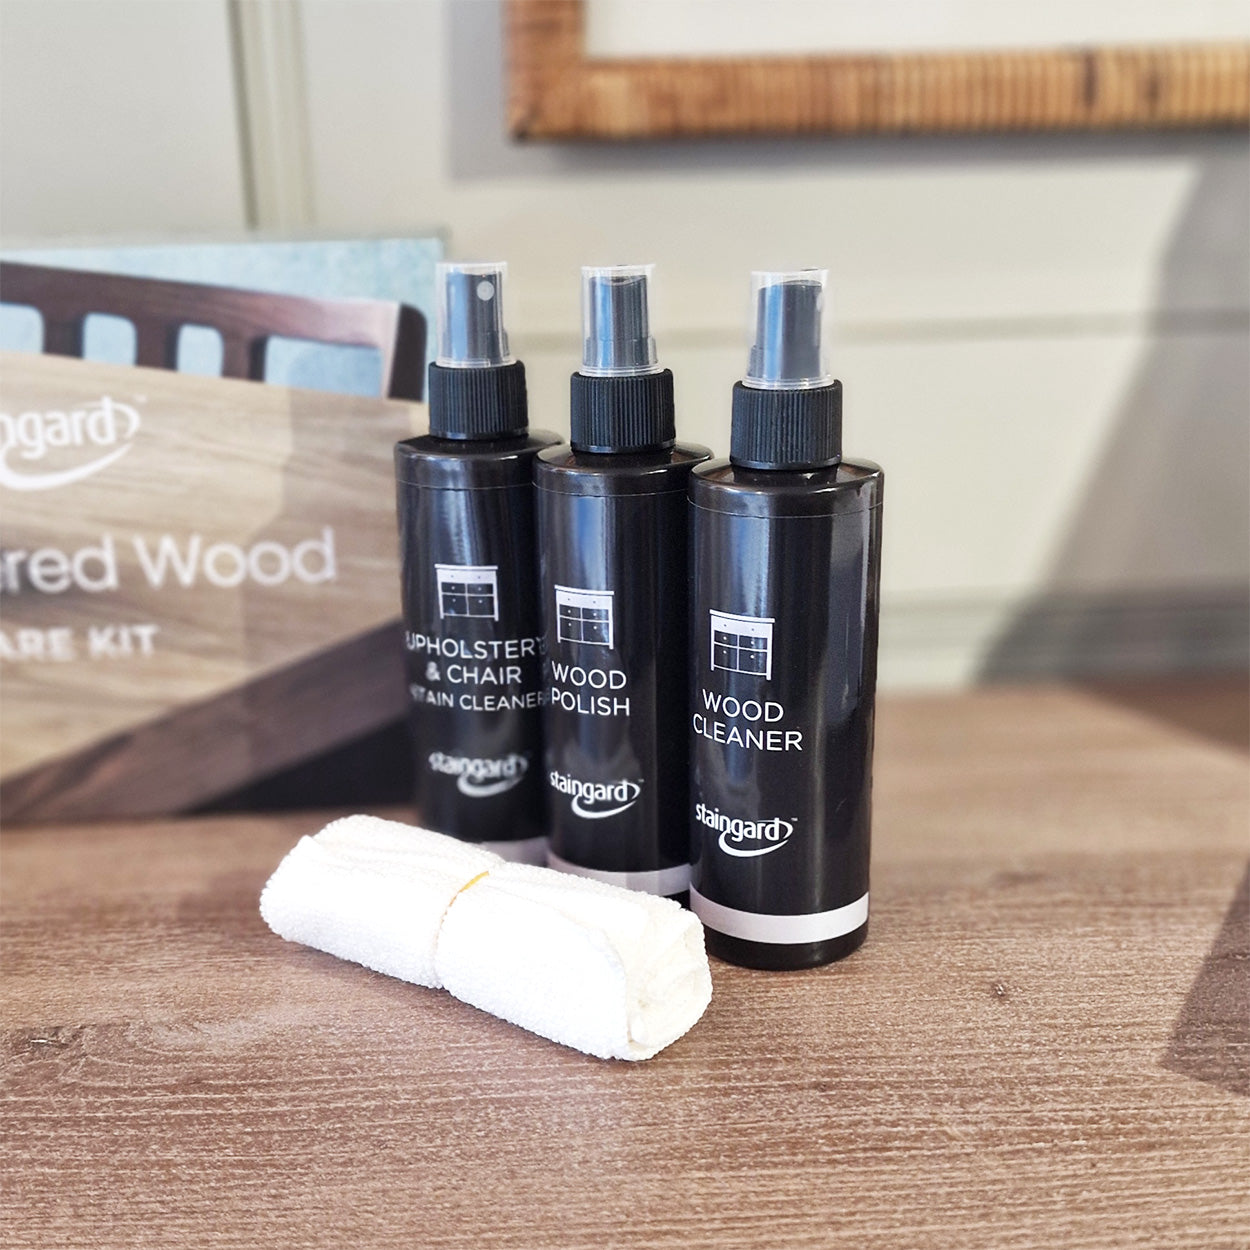 Lacquered Wood Care Kit